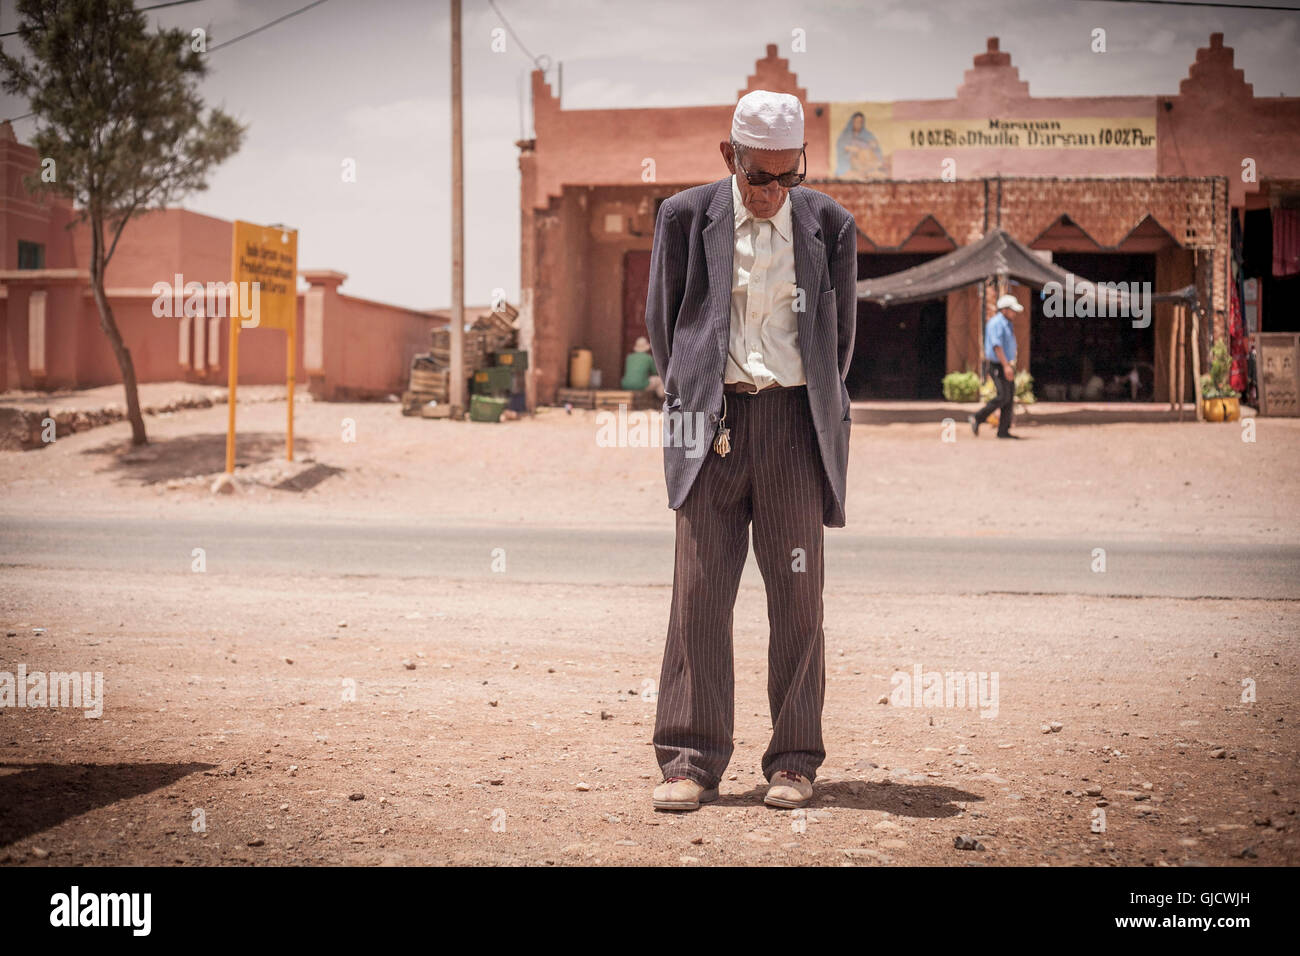 wrinkeld face, old man is looking on the ground, pious, internal calm, charisma, Morocco, Ouarzazate Stock Photo